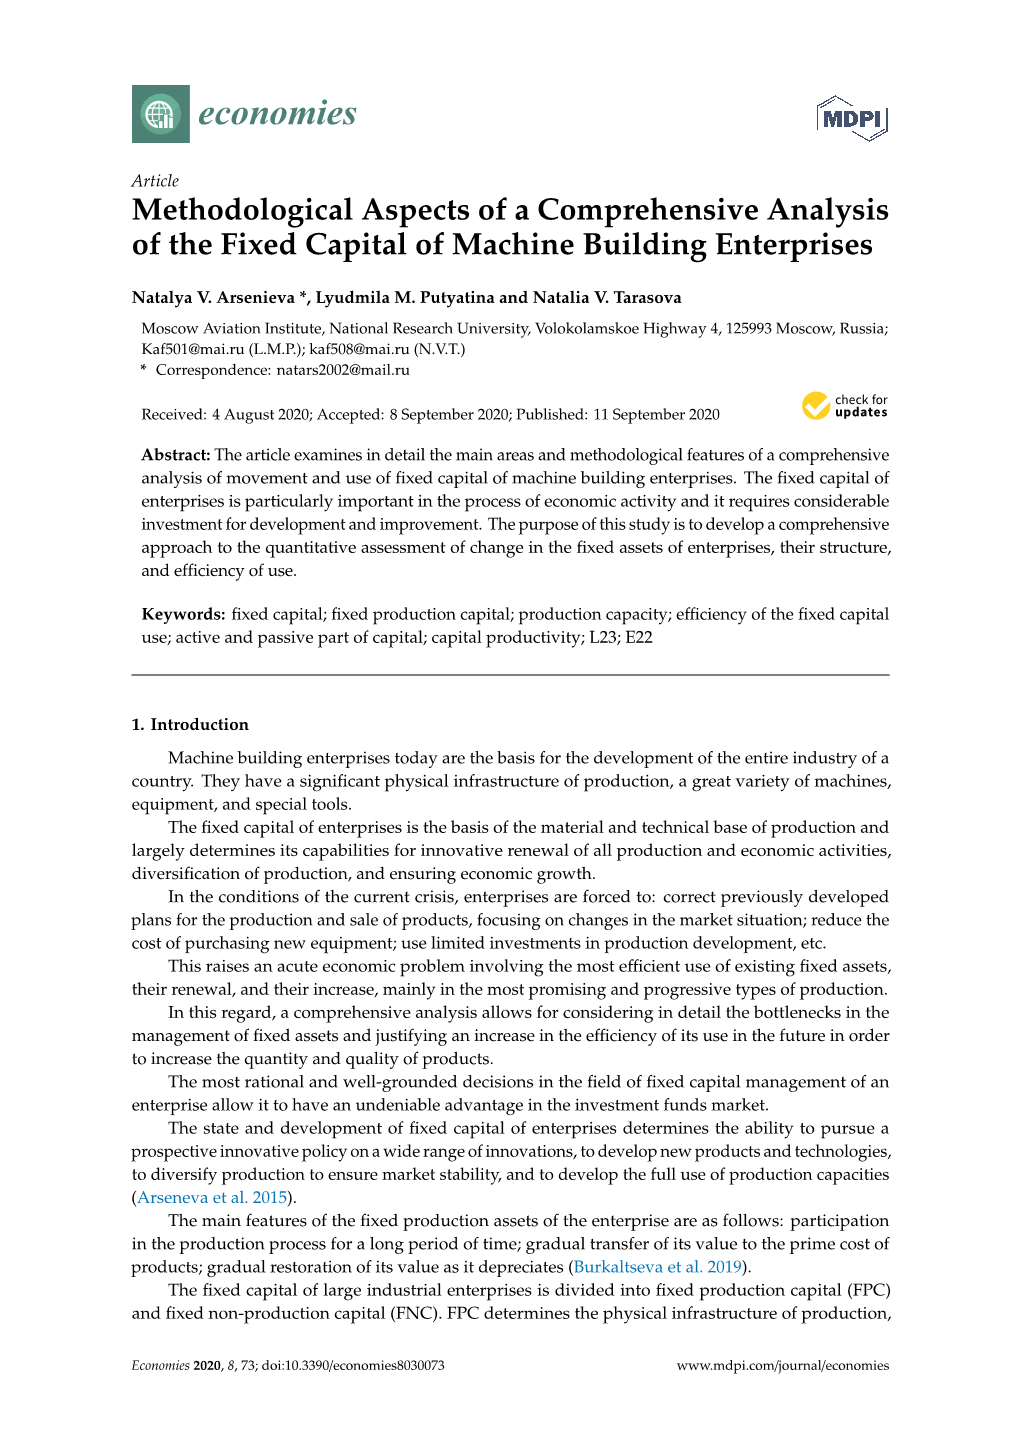 Methodological Aspects of a Comprehensive Analysis of the Fixed Capital of Machine Building Enterprises